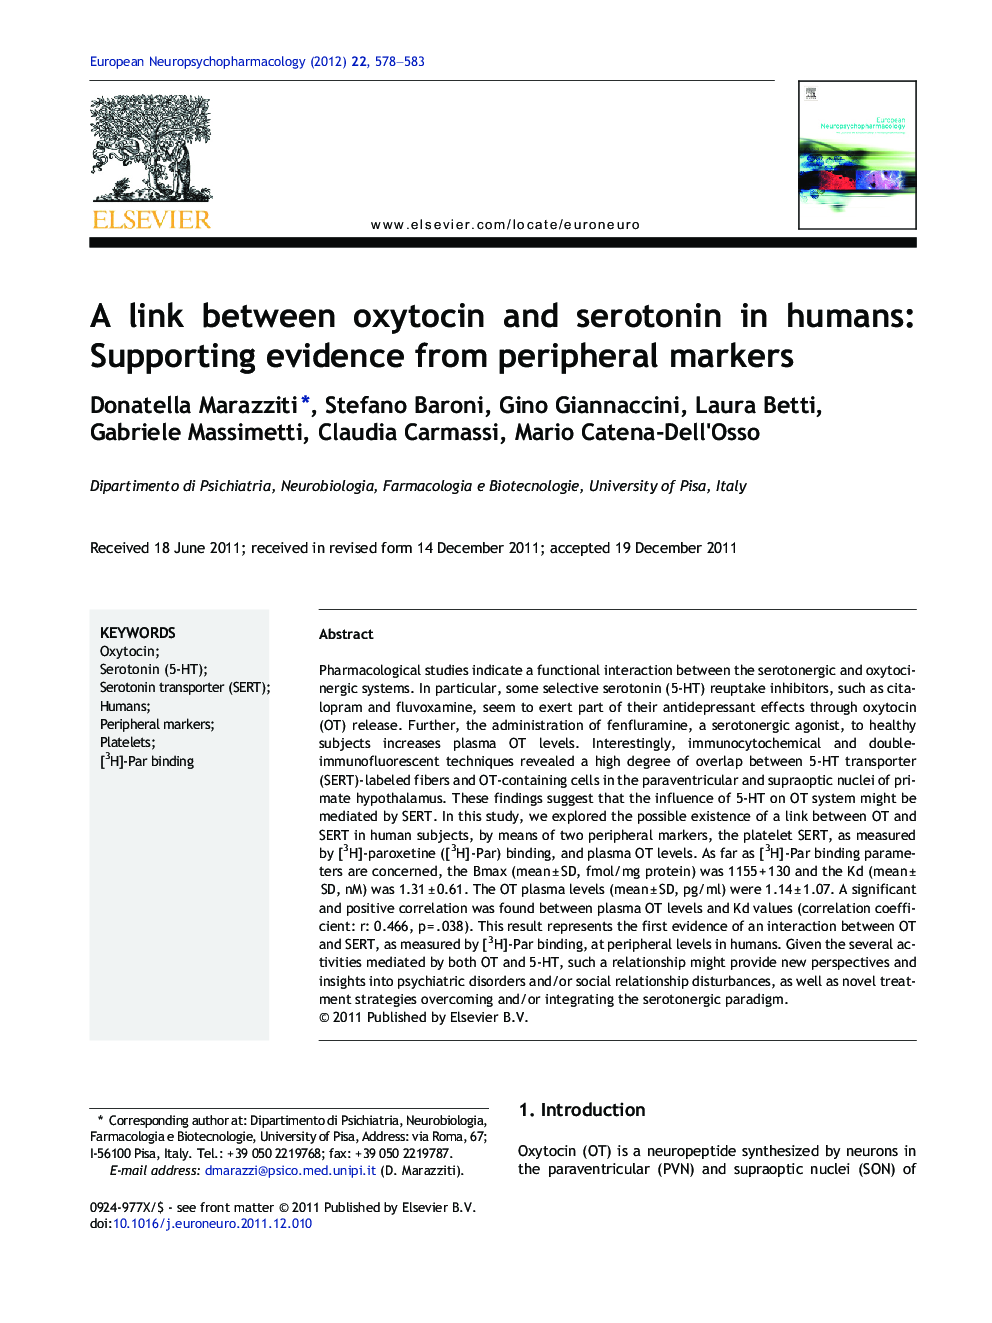 A link between oxytocin and serotonin in humans: Supporting evidence from peripheral markers